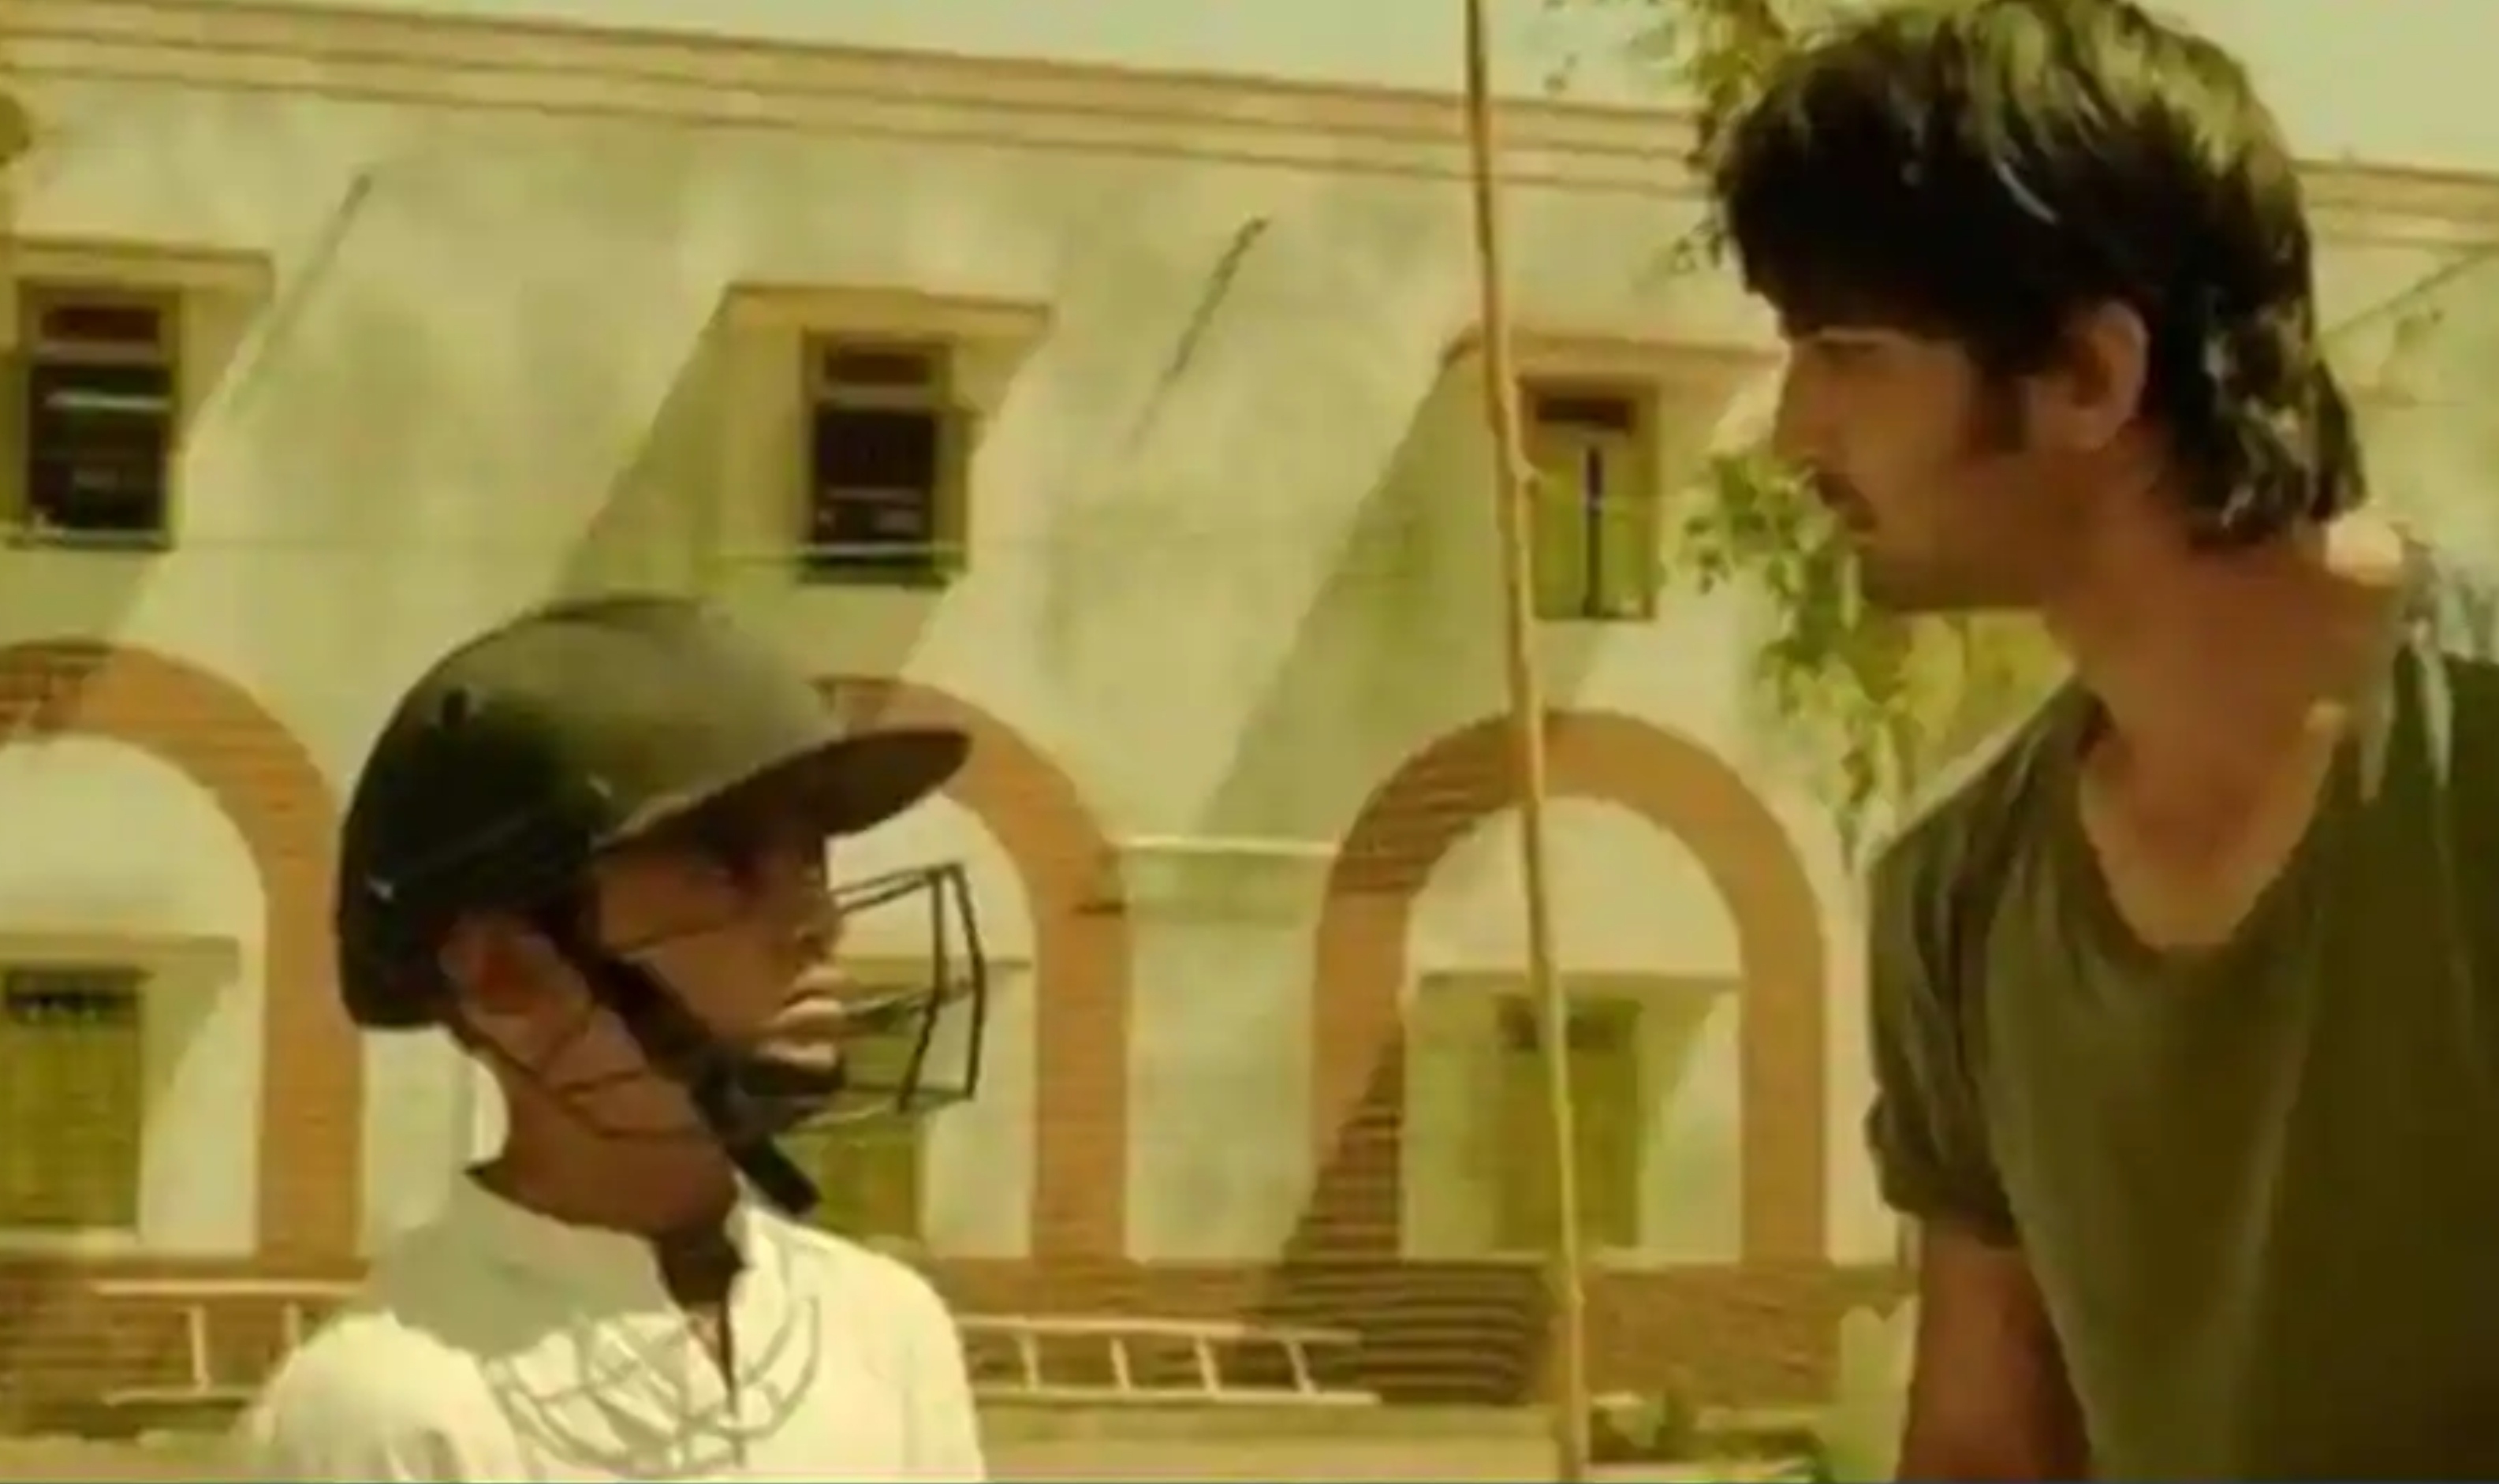 Digvijay Deshmukh and Sushant Singh Rajput in a still from their film Kai Po Che | Twitter